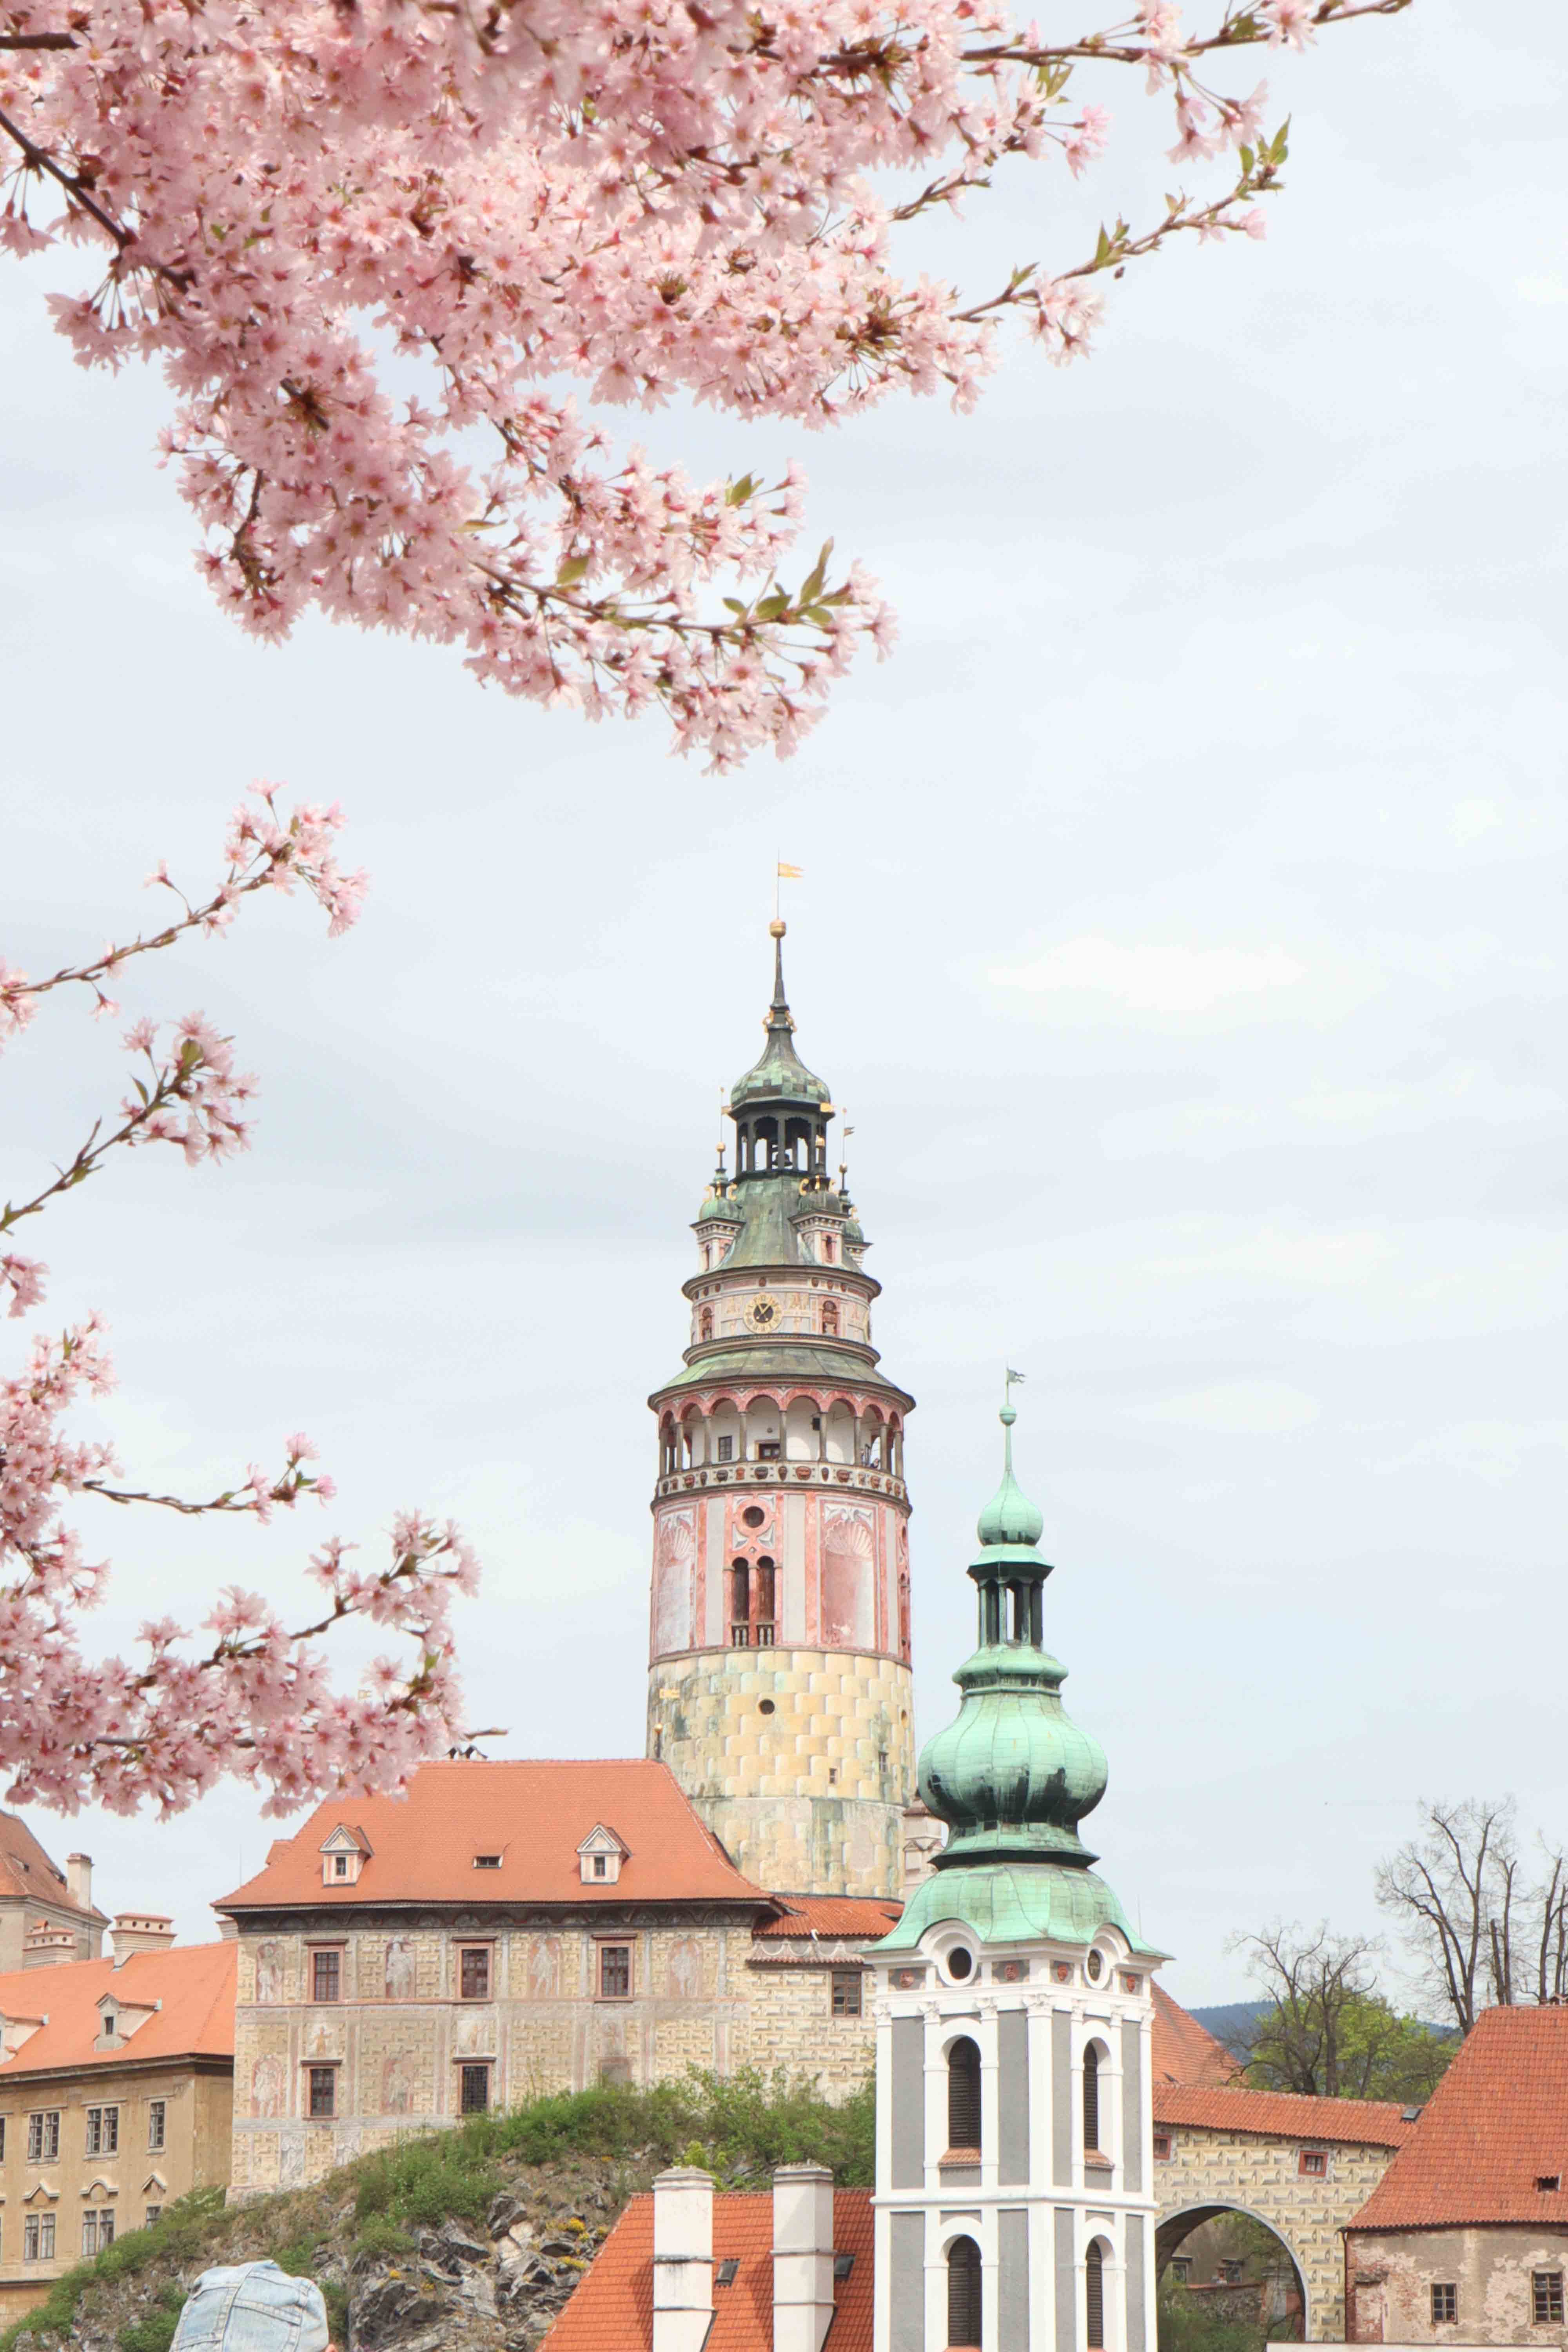 Cesky Krumlov 15 Cool Things To Do in Prague and the Czech Republic